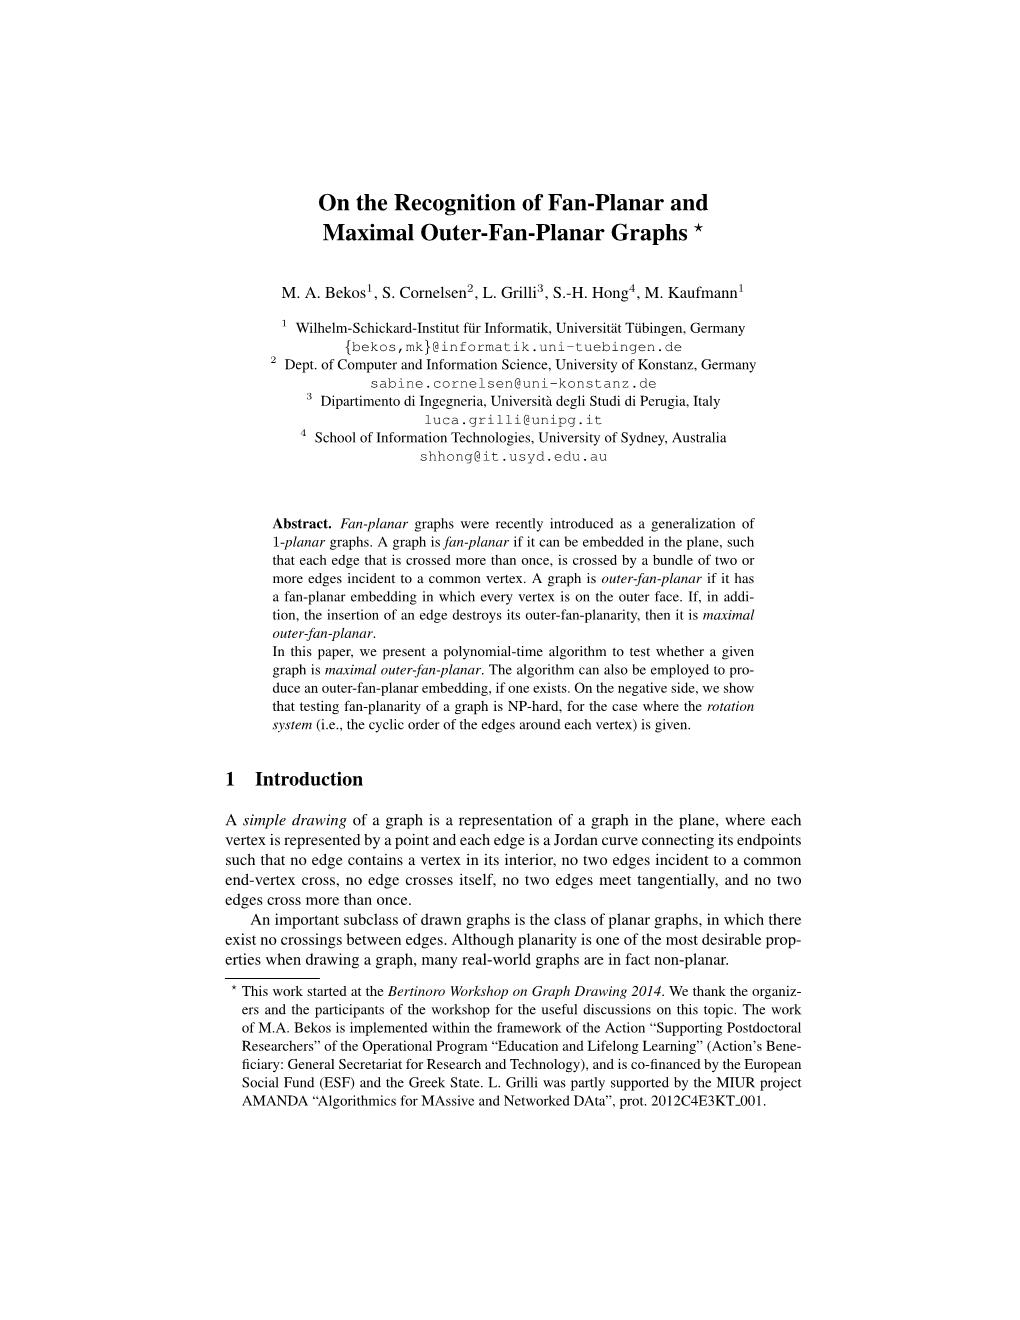 On the Recognition of Fan-Planar and Maximal Outer-Fan-Planar Graphs ⋆